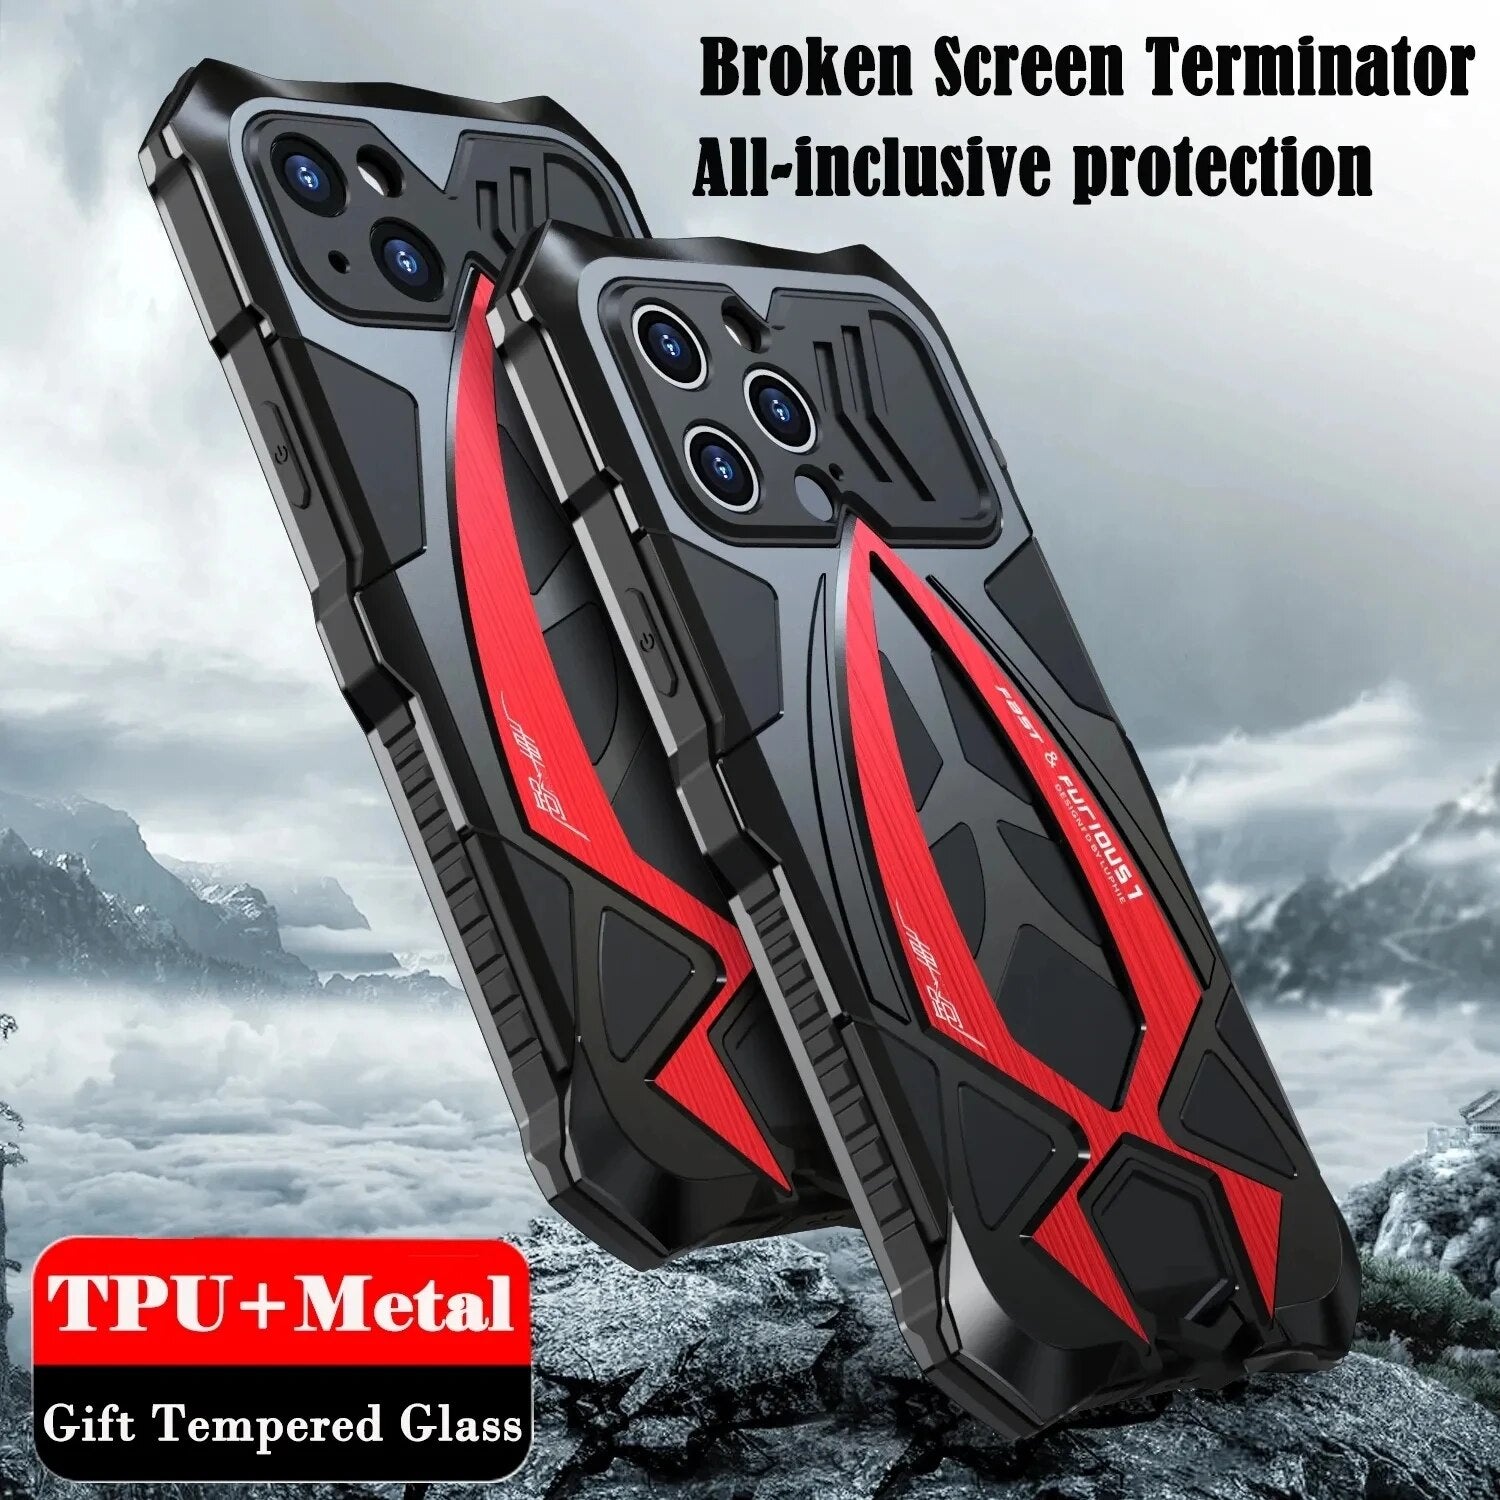 GuardianShield: Heavy Duty Armor Phone Case for iPhone and Samsung